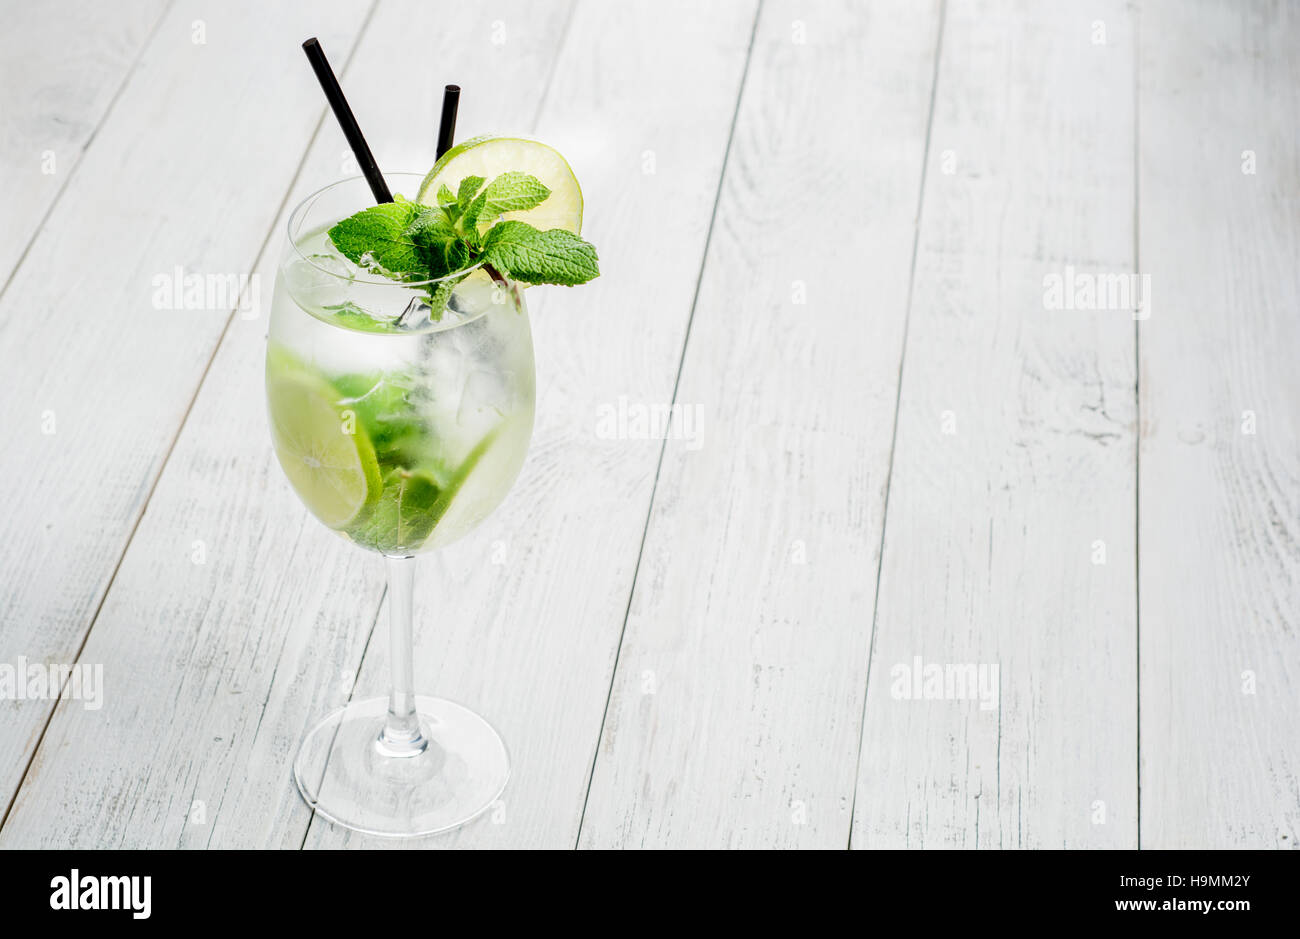 Martini royale Cocktail on wooden table with lime and mint. Stock Photo